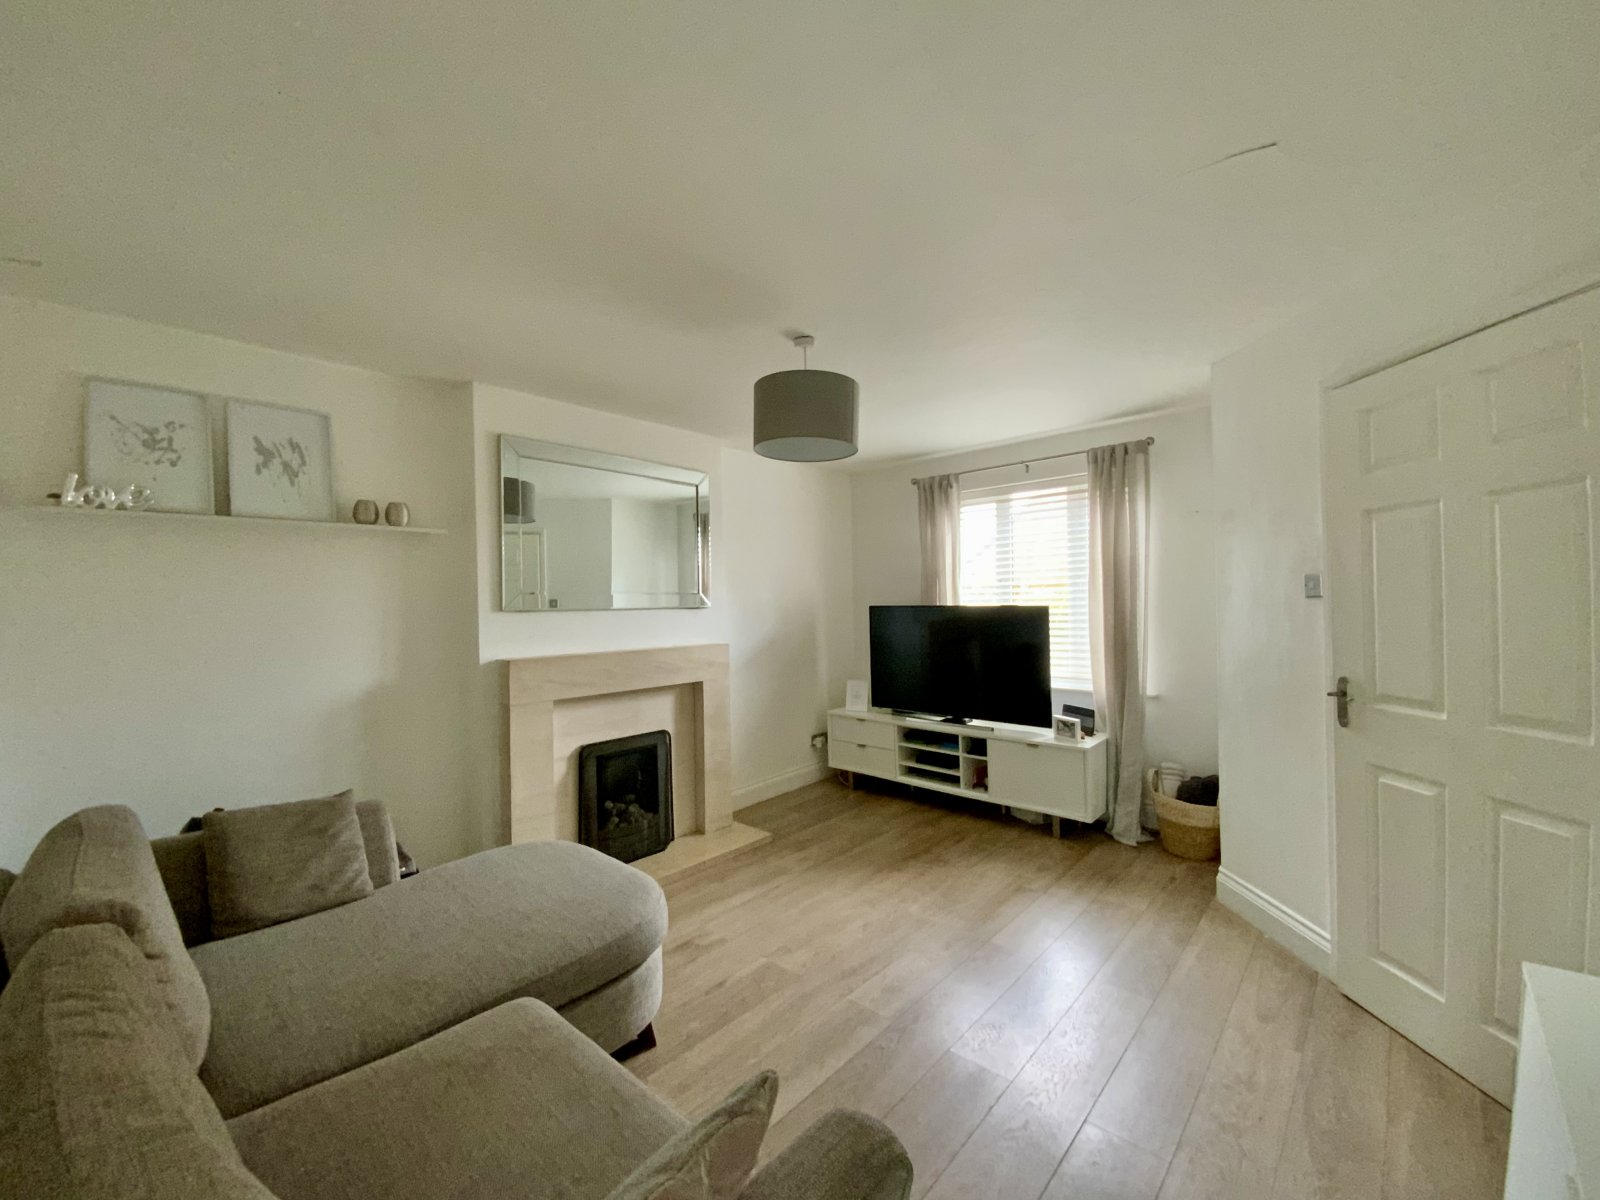 3 bed house for sale in Holystone Drive, Ingleby Barwick  - Property Image 2